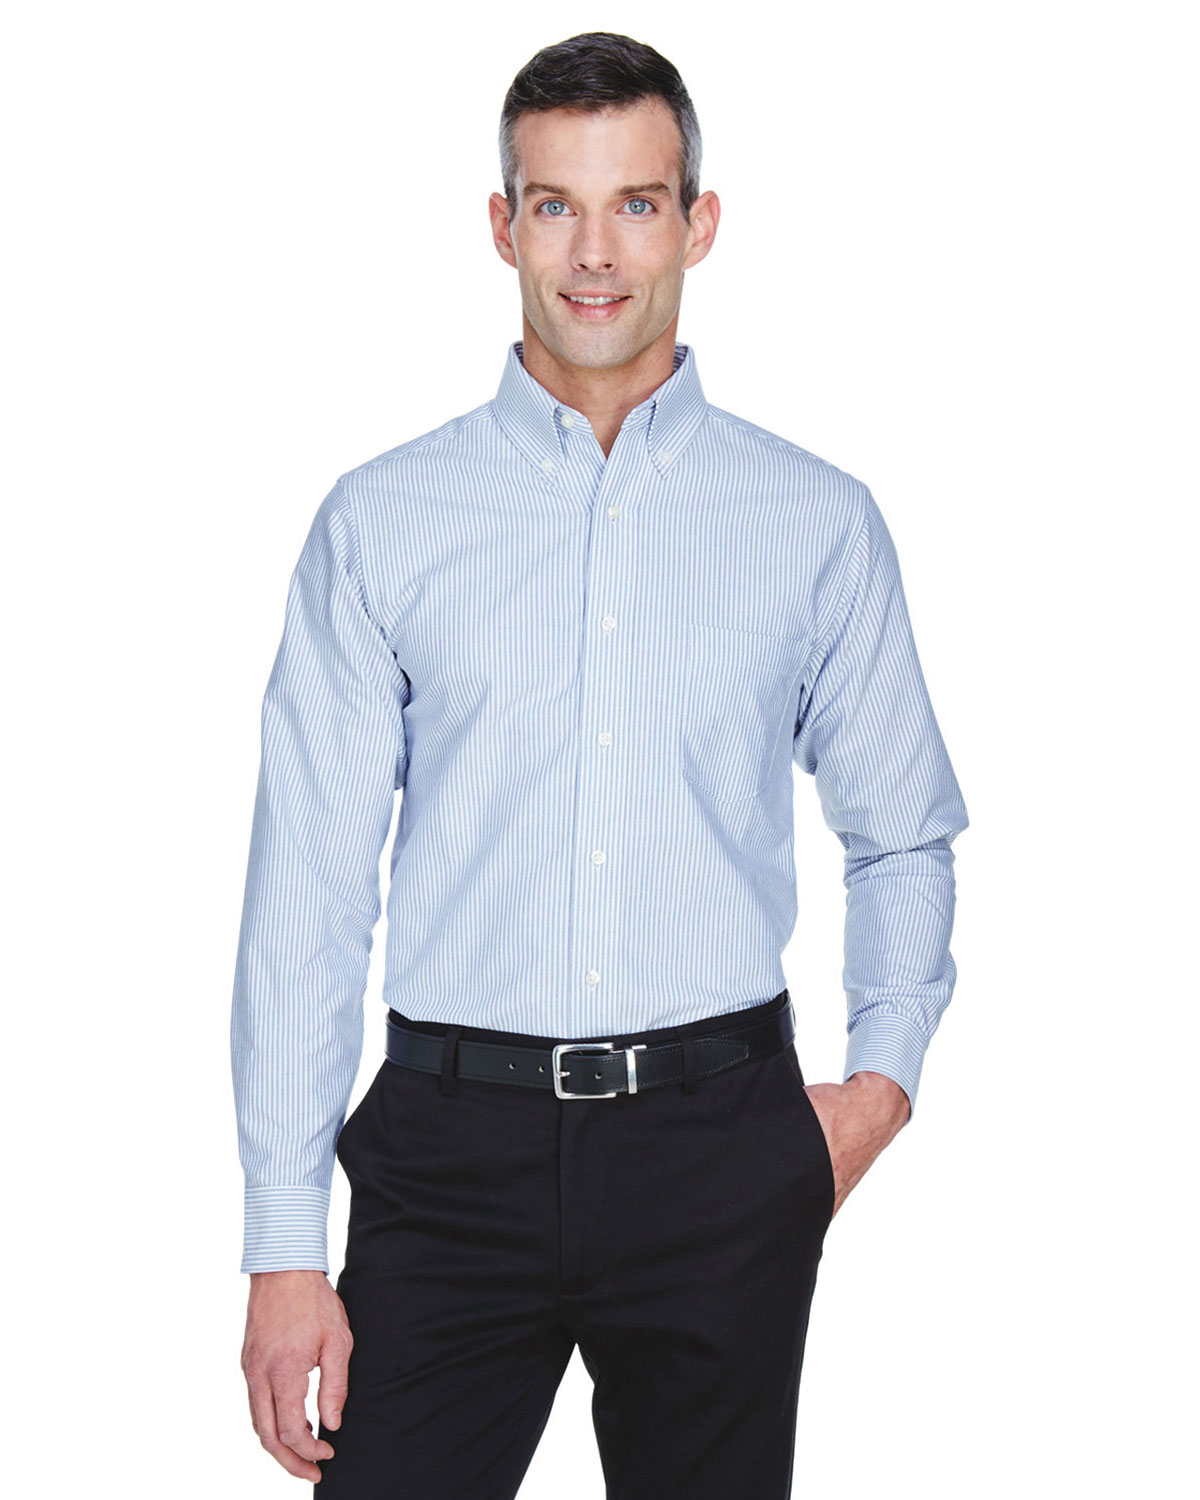 Ultraclub 8970 Men Classic Wrinkle-Free Long-Sleeve Oxford at Apparelstation